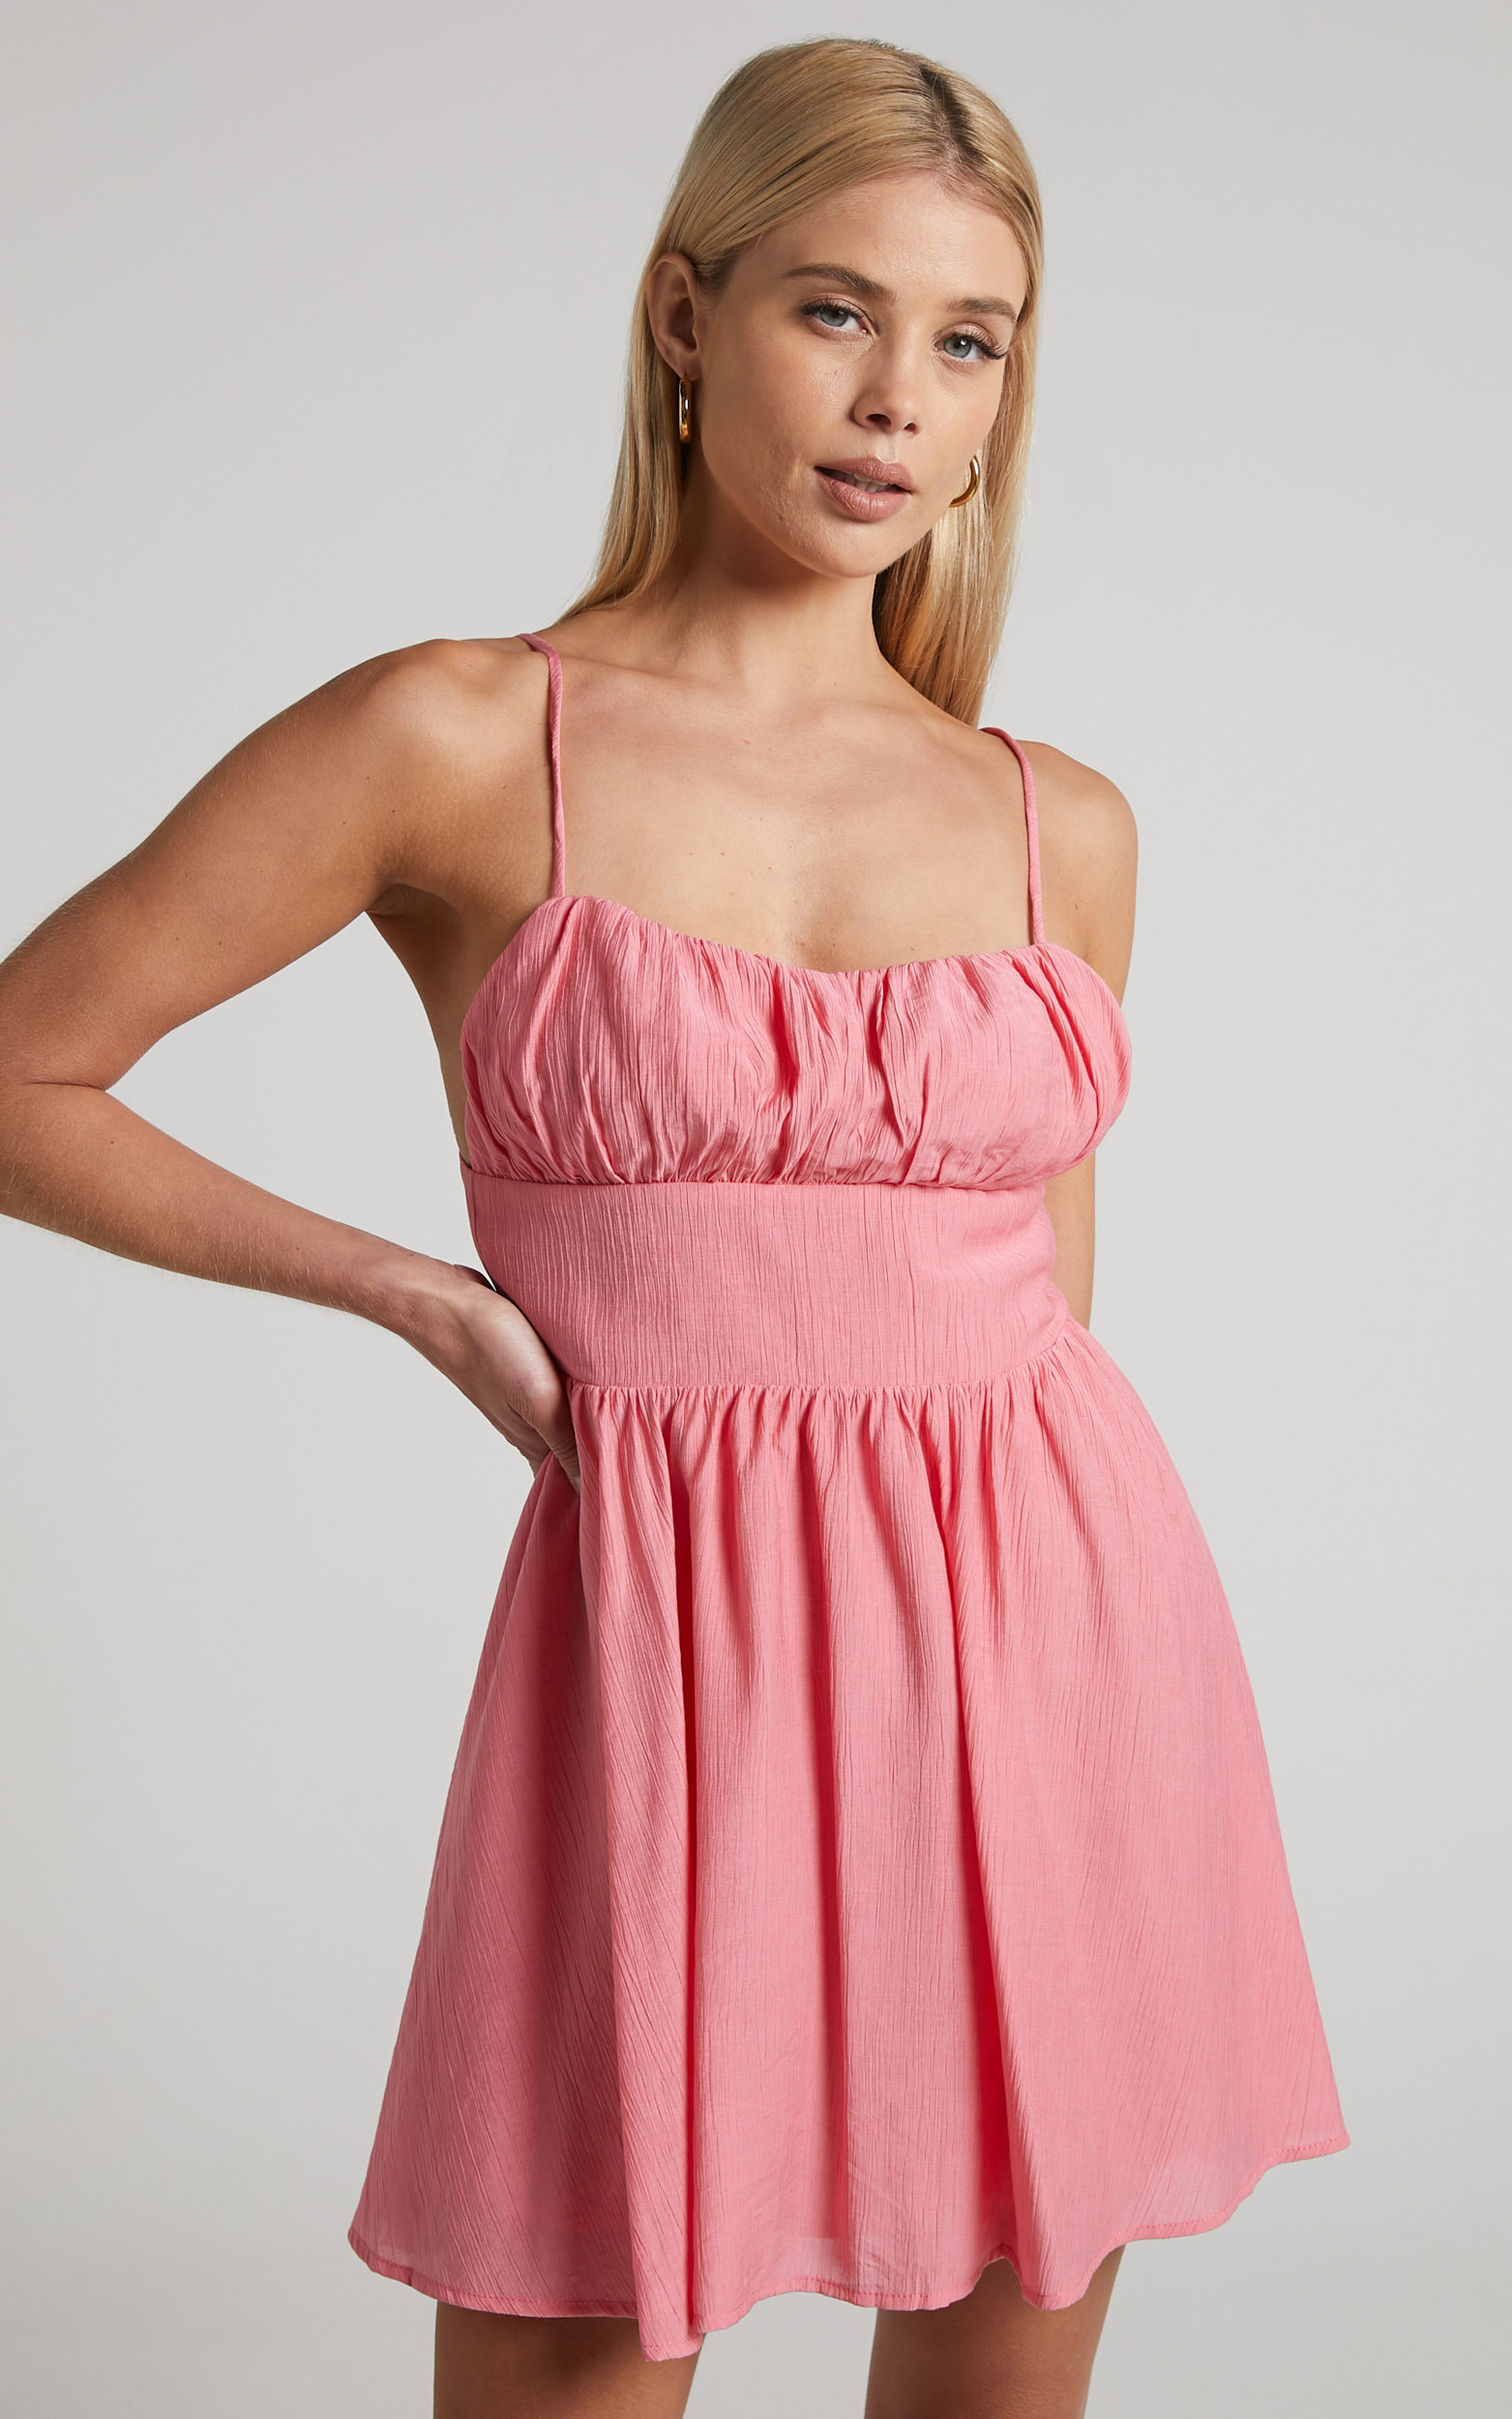 Dhalia Mini Dress - Ruched Bust Fit and Flare Dress in Pink - 06, PNK1, hi-res image number null